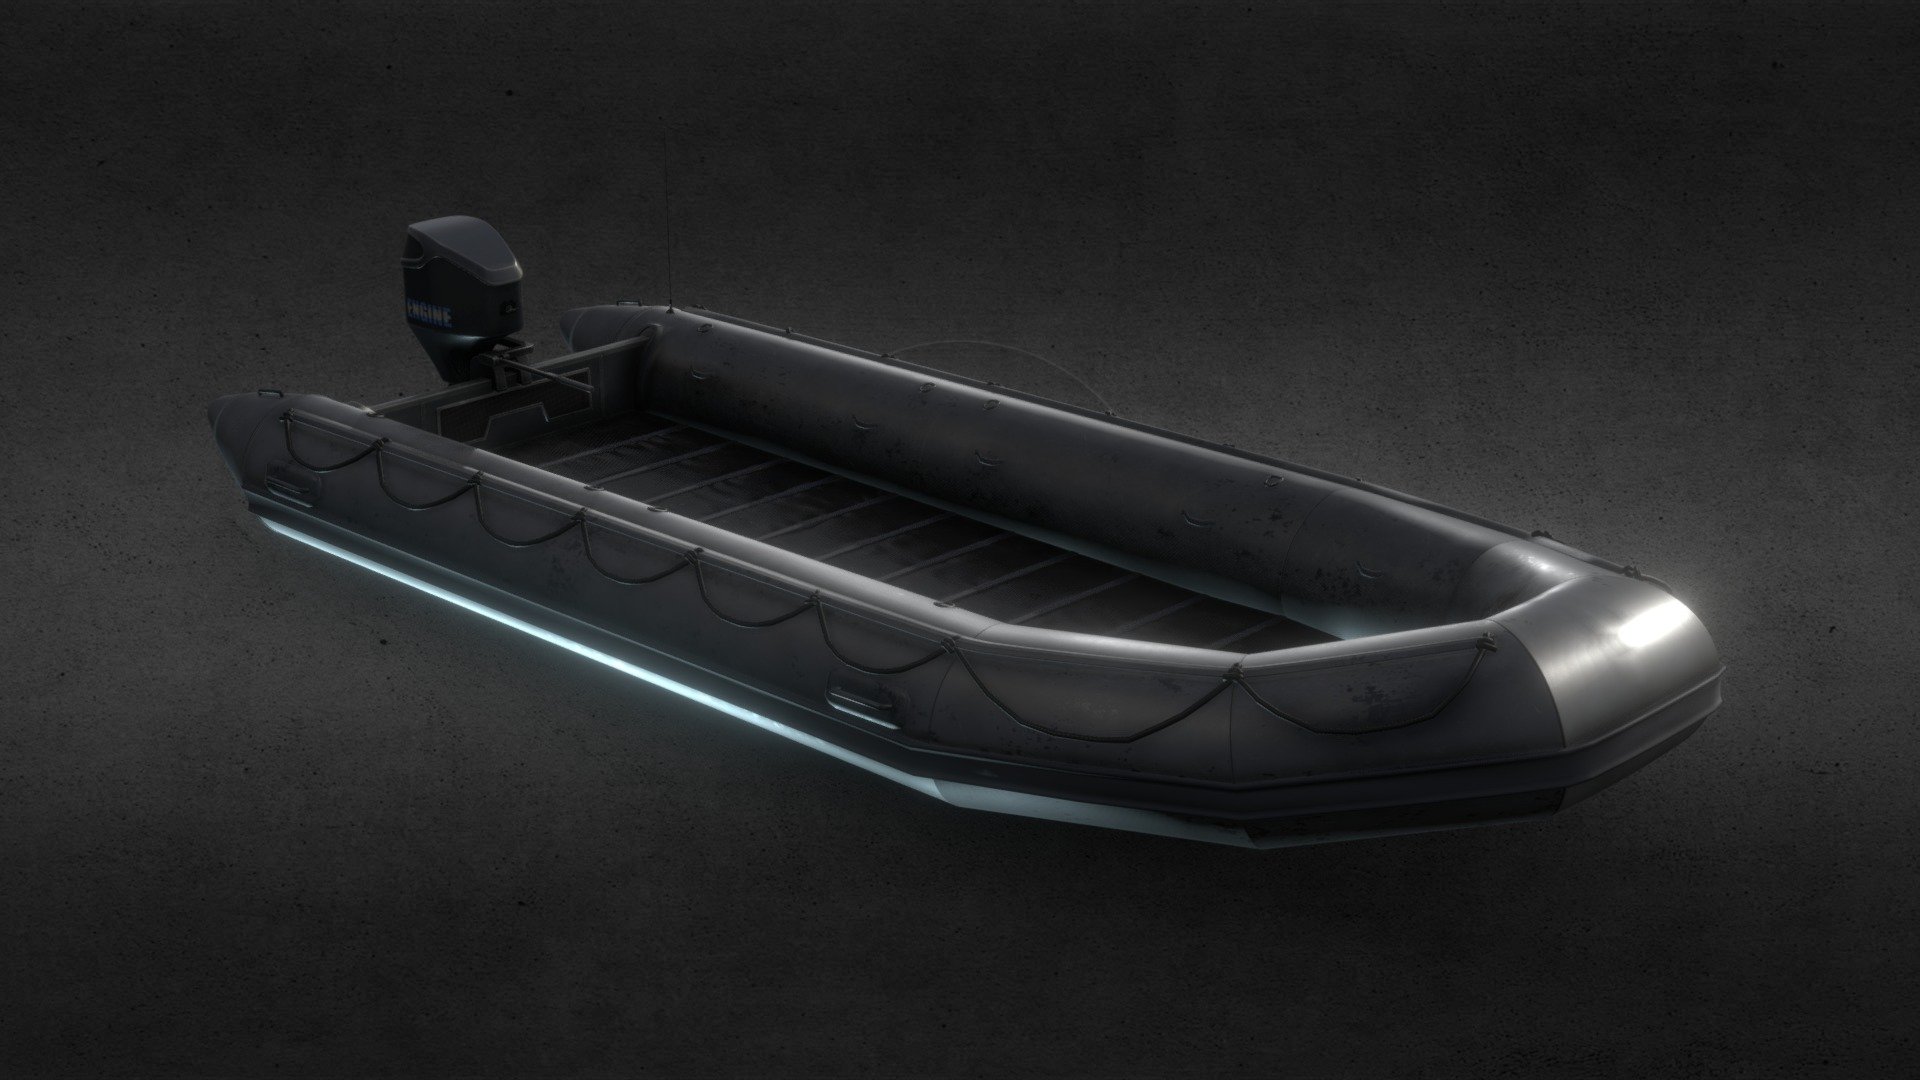 Inflatable boat!
Game ready works good at Unity &amp; Unreal Engine !

Pack contains:
Inflatable boat with PBR separate materials.

Textures : 

Albedo 4k
Normal 4k
Specular 4k
Ambient Oclussion 4k

Inflatable boat:
ORM (Oclussion, Roughness, Metalness - channel packed texture) 4k

Feel free to contact us via email
studiokasit@gmail.com

VR / AR / Low-poly / Game ready / inflatable boat / pontoon / rigid boat / rubber boat 3D model - Inflatable boat game ready PBR - Buy Royalty Free 3D model by Kasit Studio (@kasit) 3d model